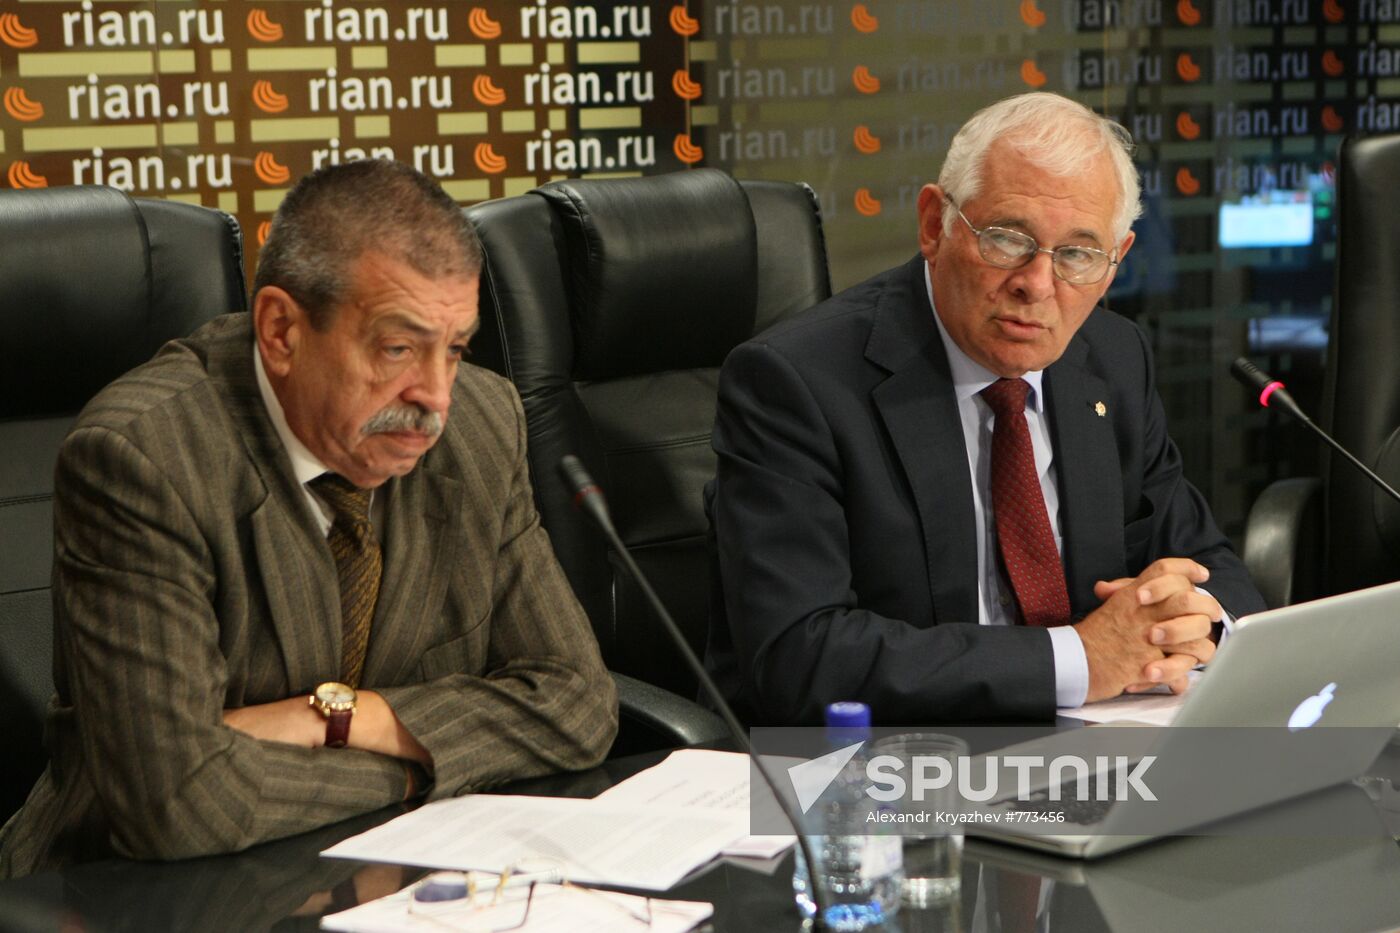 Press conference given by Leonid Roshal and Mikhail Kuzmenko